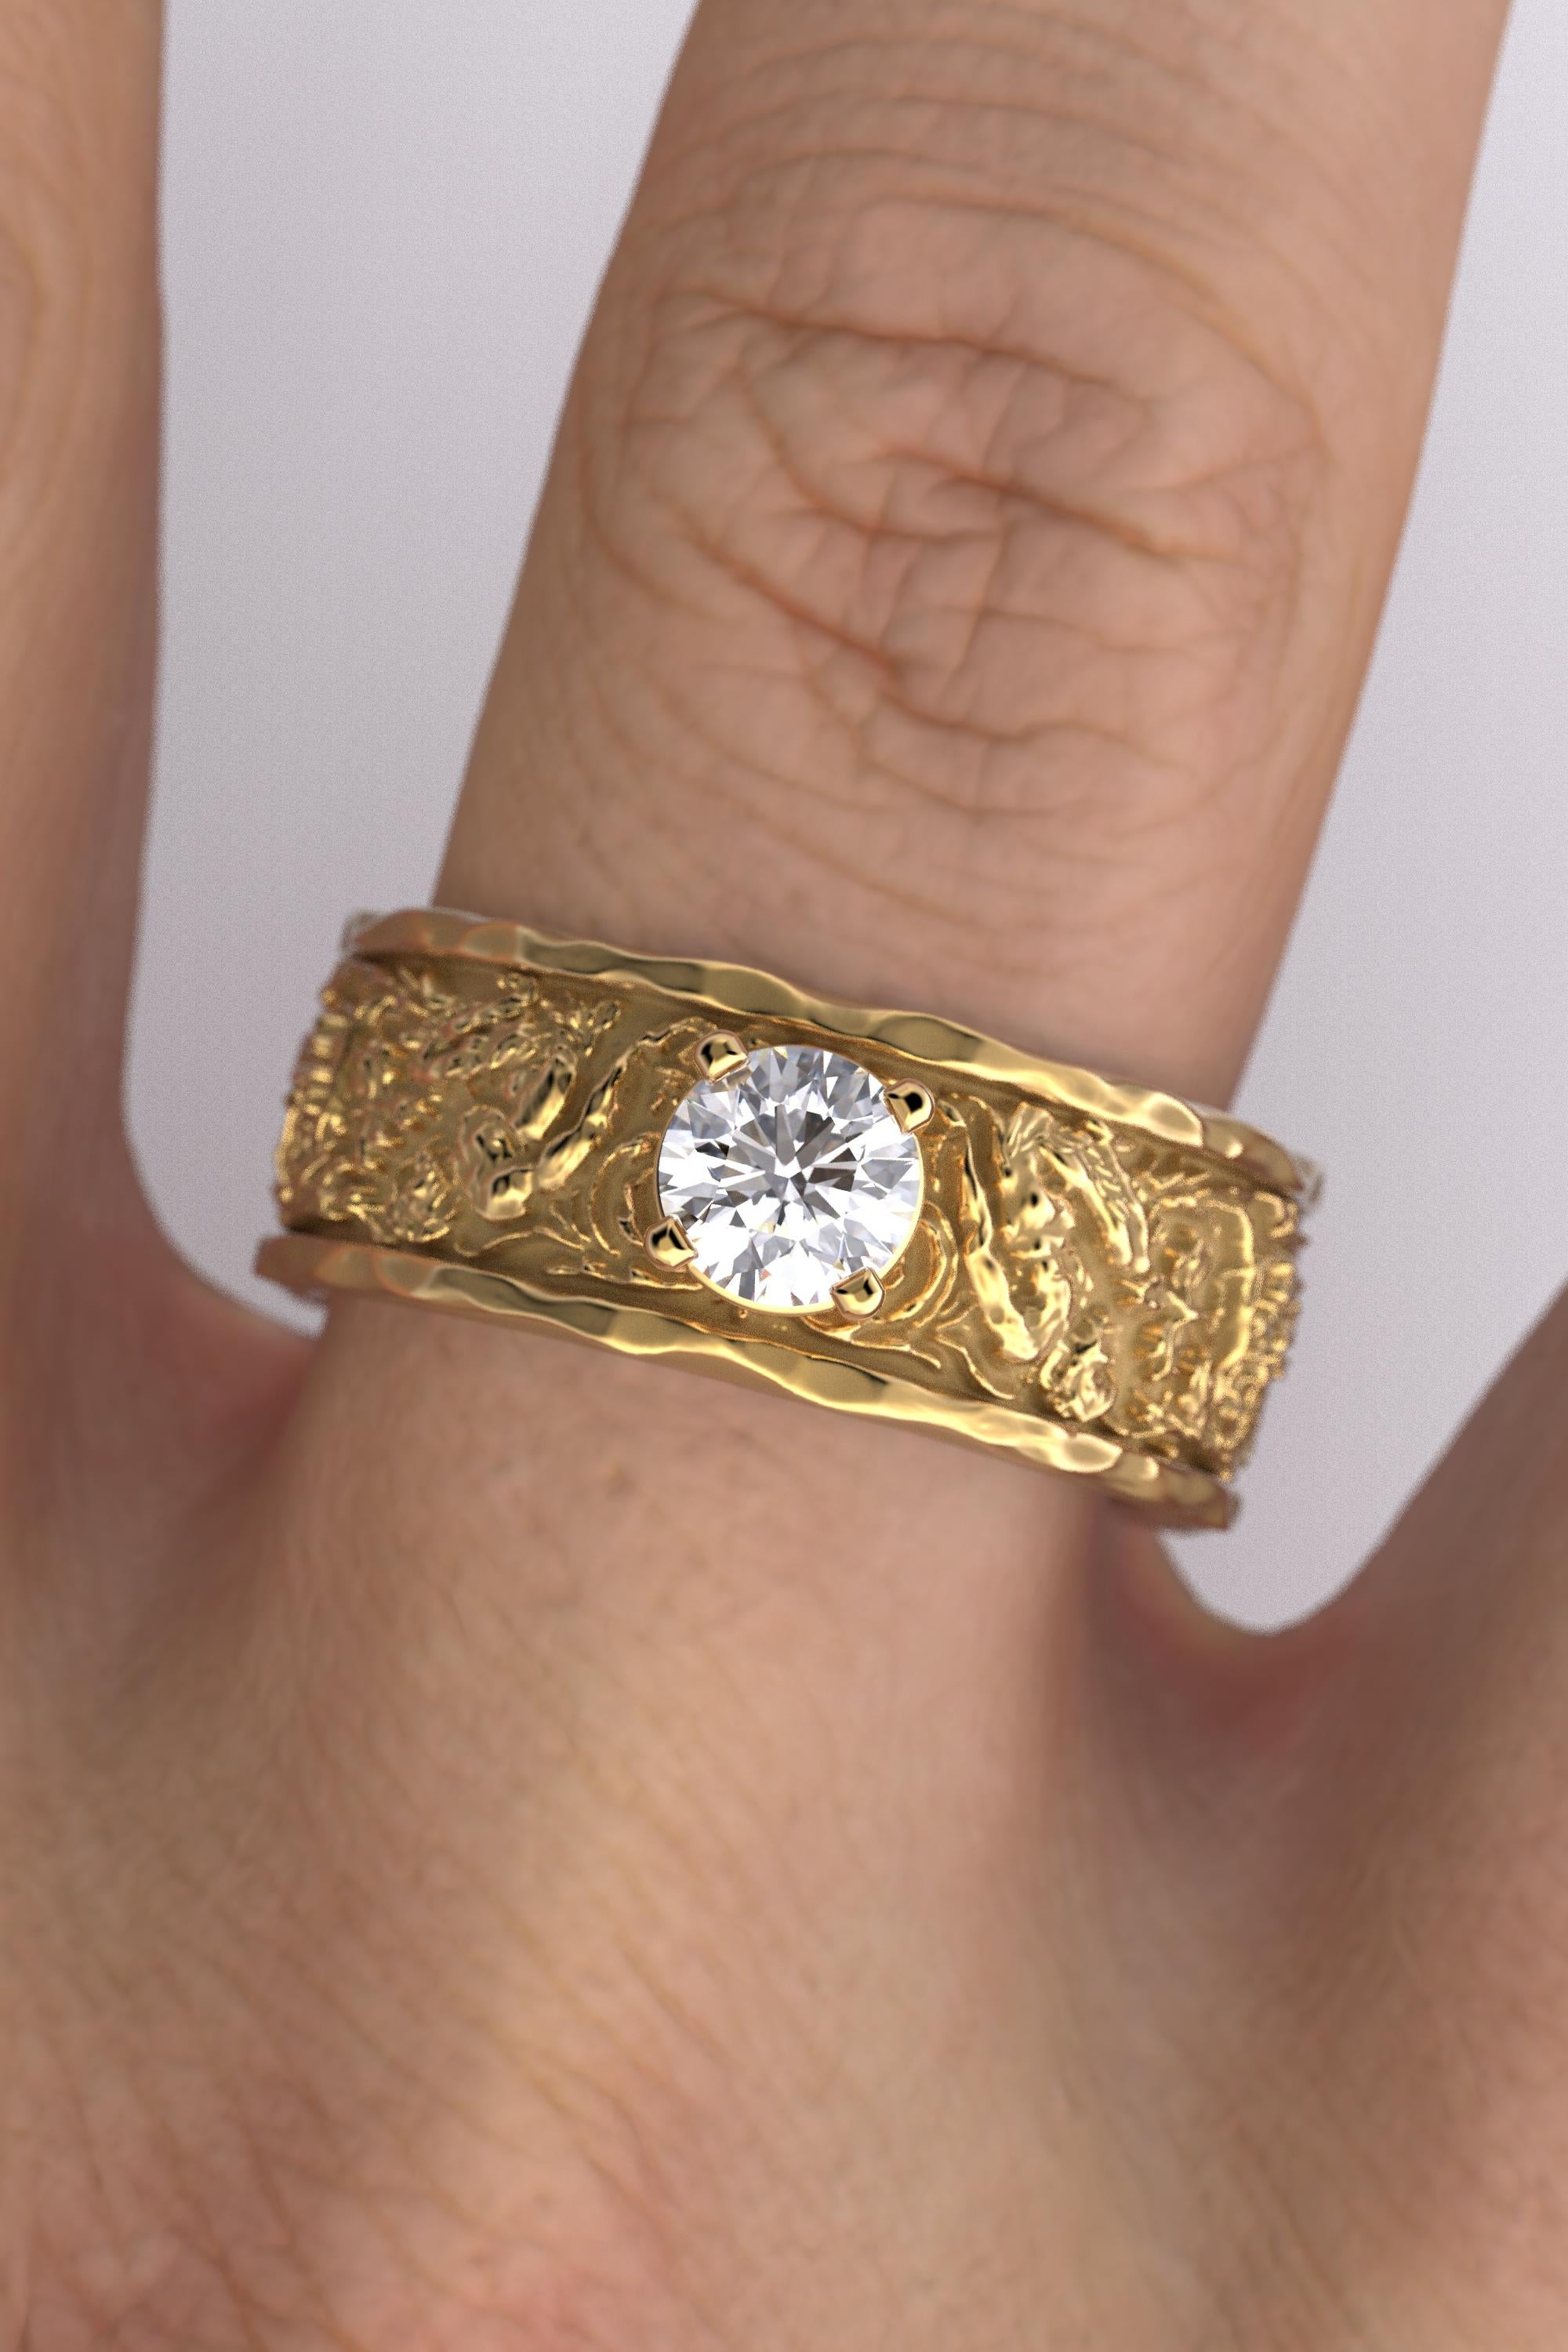 For Sale:  Men's Wedding Band: 18k Gold with Natural Half-Carat Diamond, made in Italy ring 5